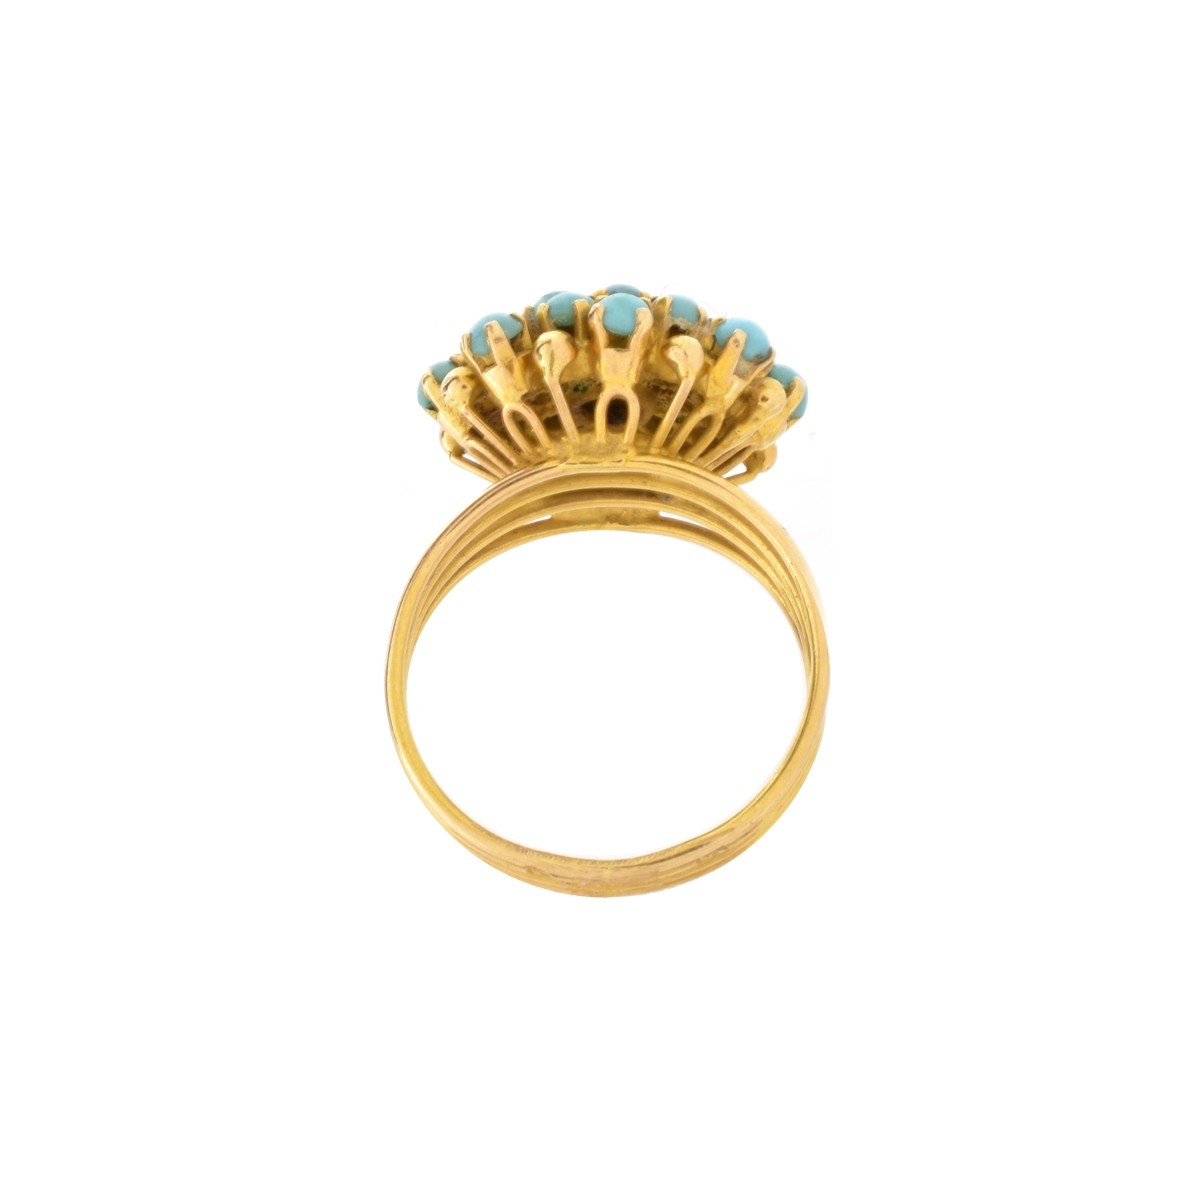 Persian Turquoise and 18K Ring